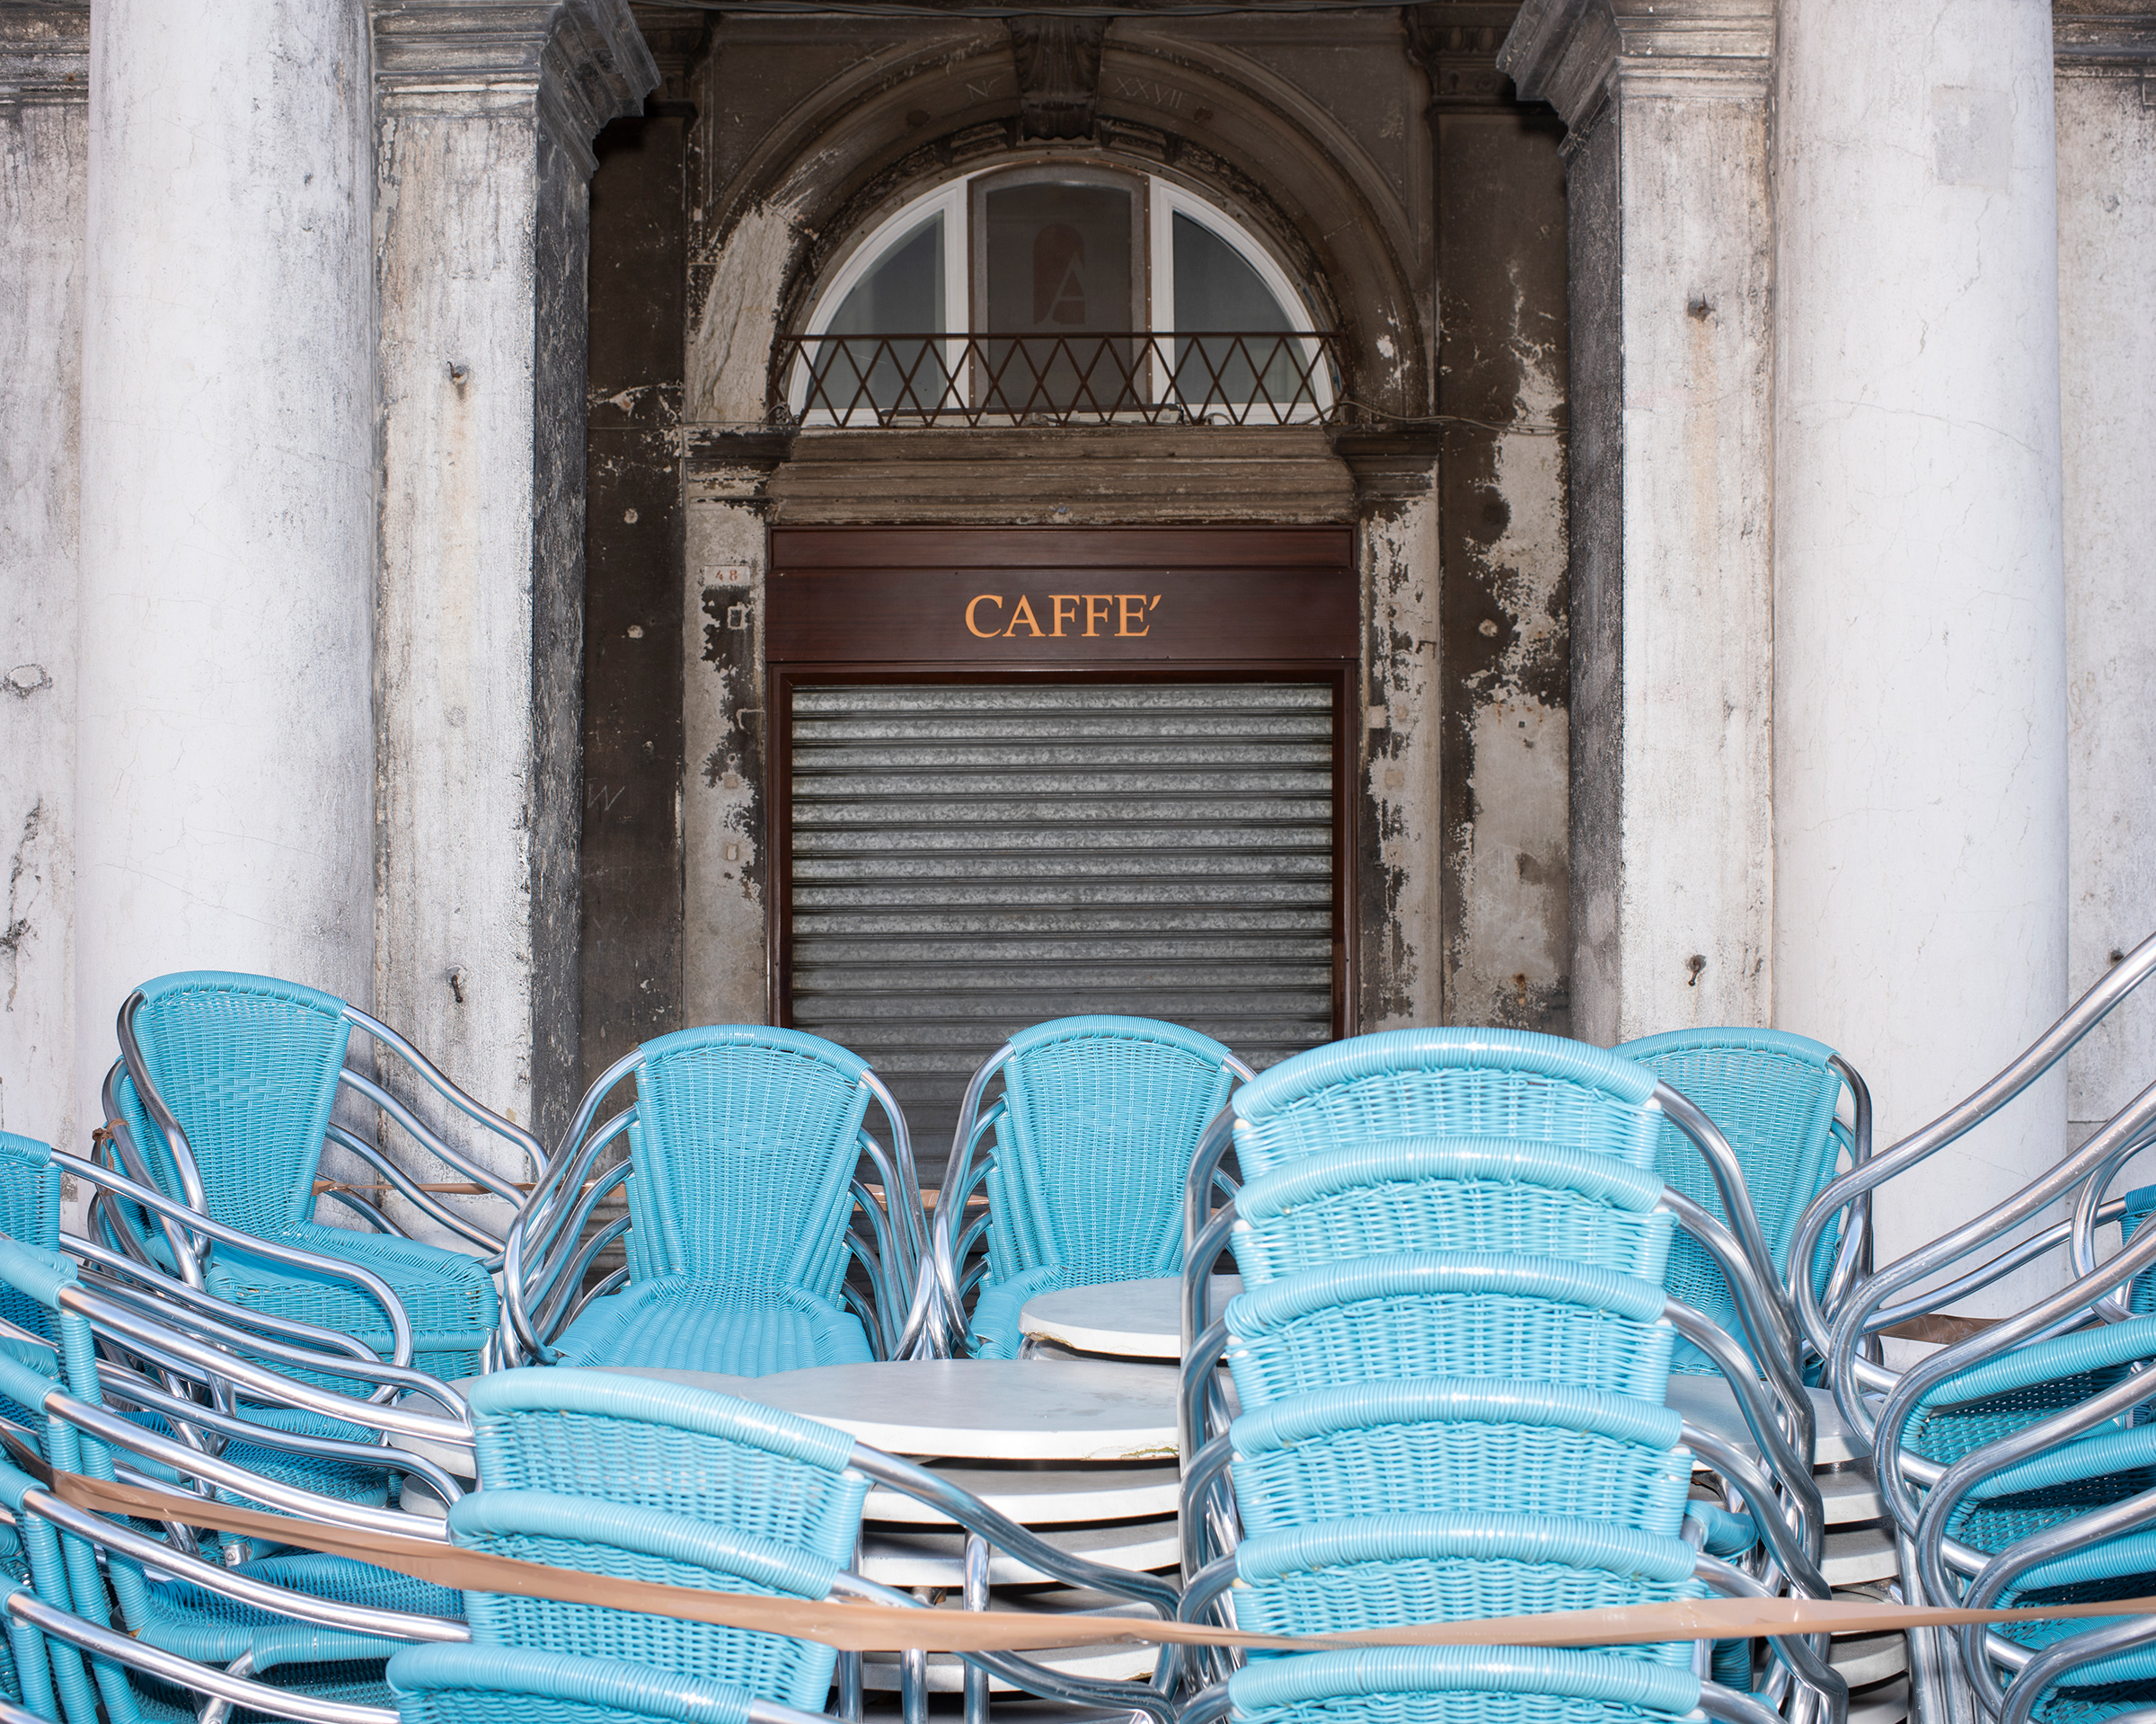 A closed coffee shop in St. Mark's Square.